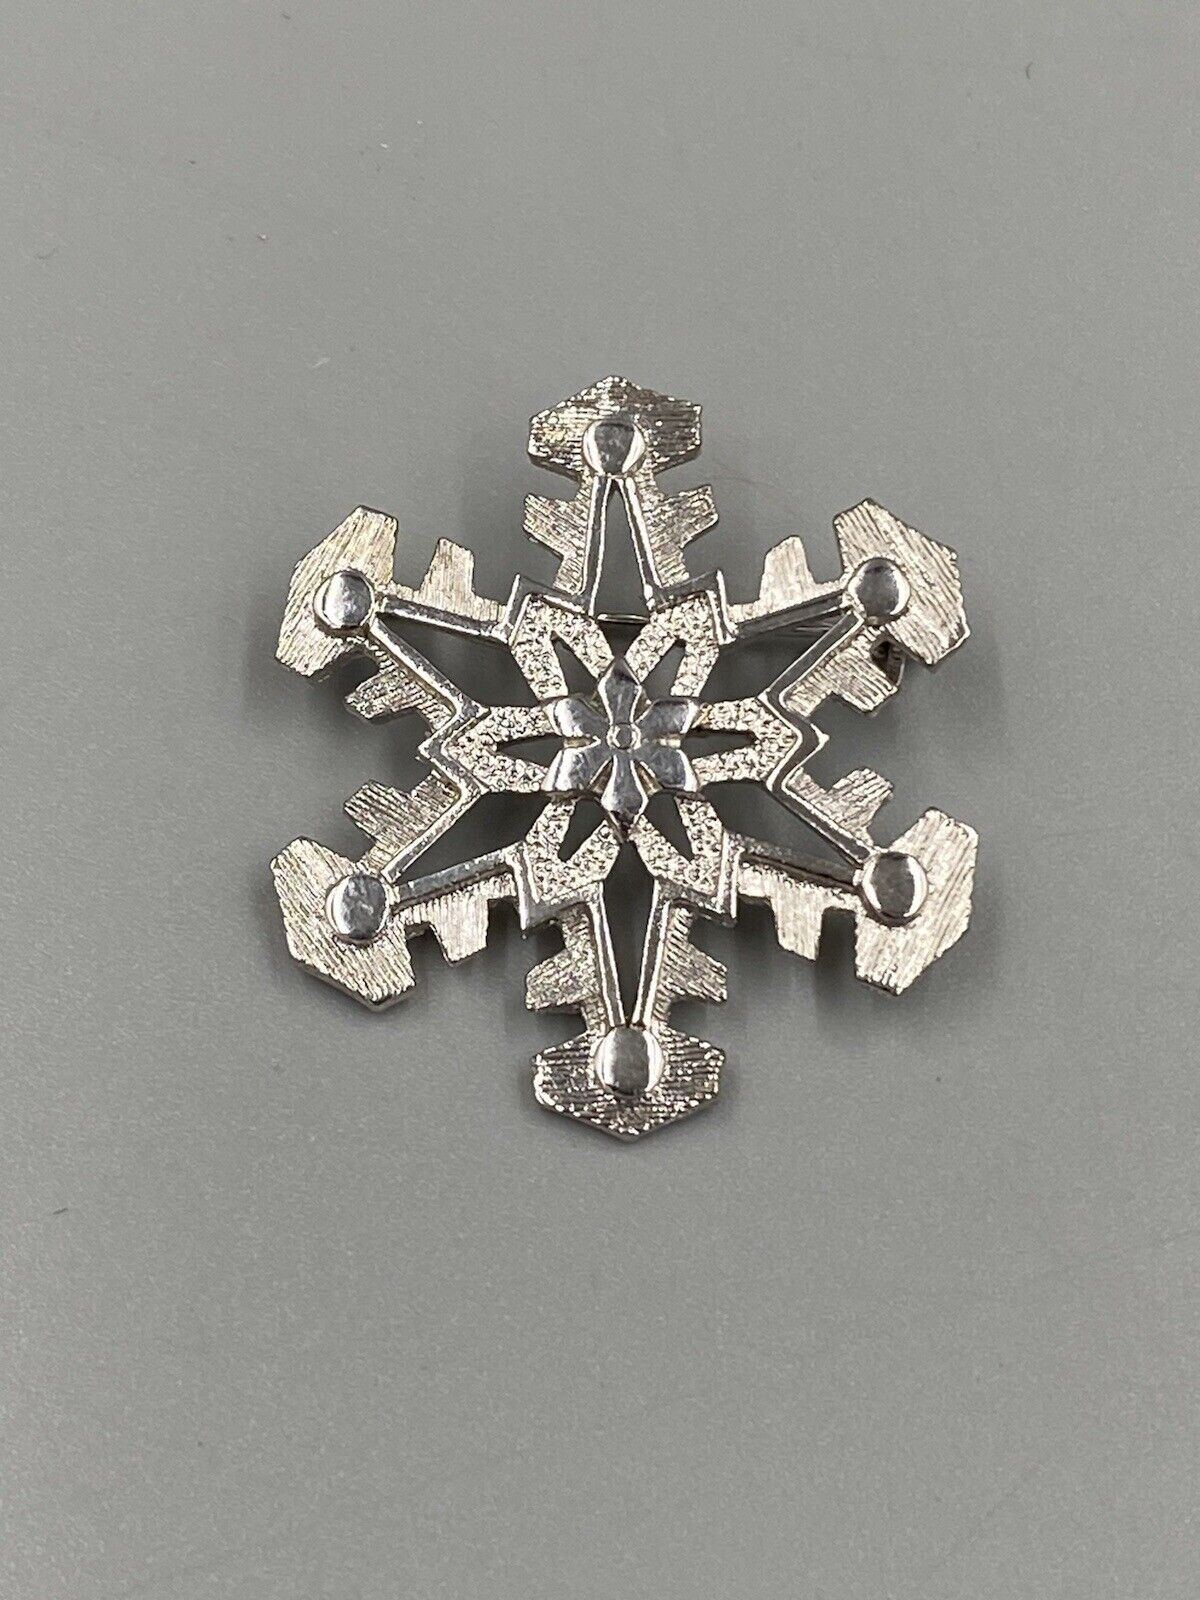 Vintage Sarah Coventry Snowflake Silver Colored Lapel Pin Brooch